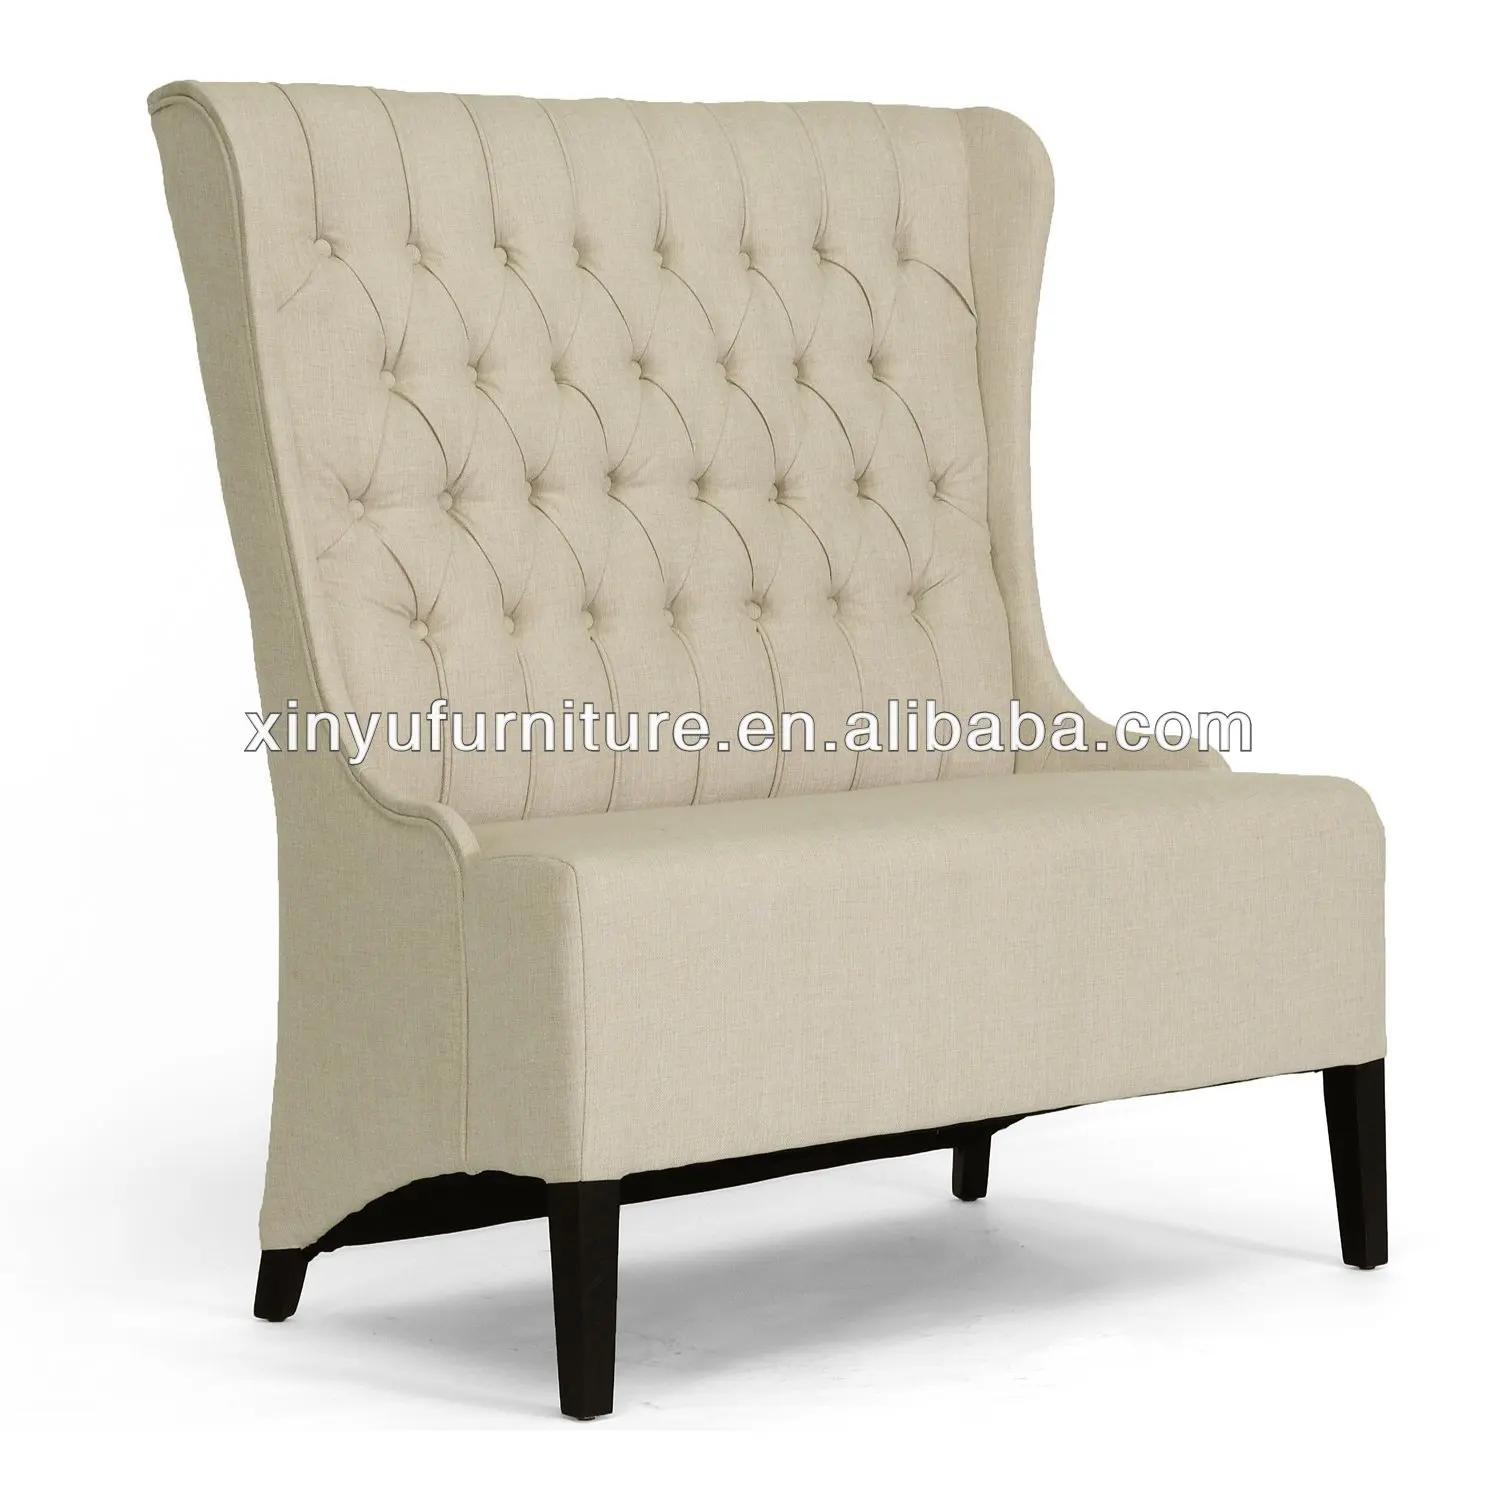 High Back Reception Sofa Xy0382 Buy High Back Reception Sofa intended for High Back Loveseats